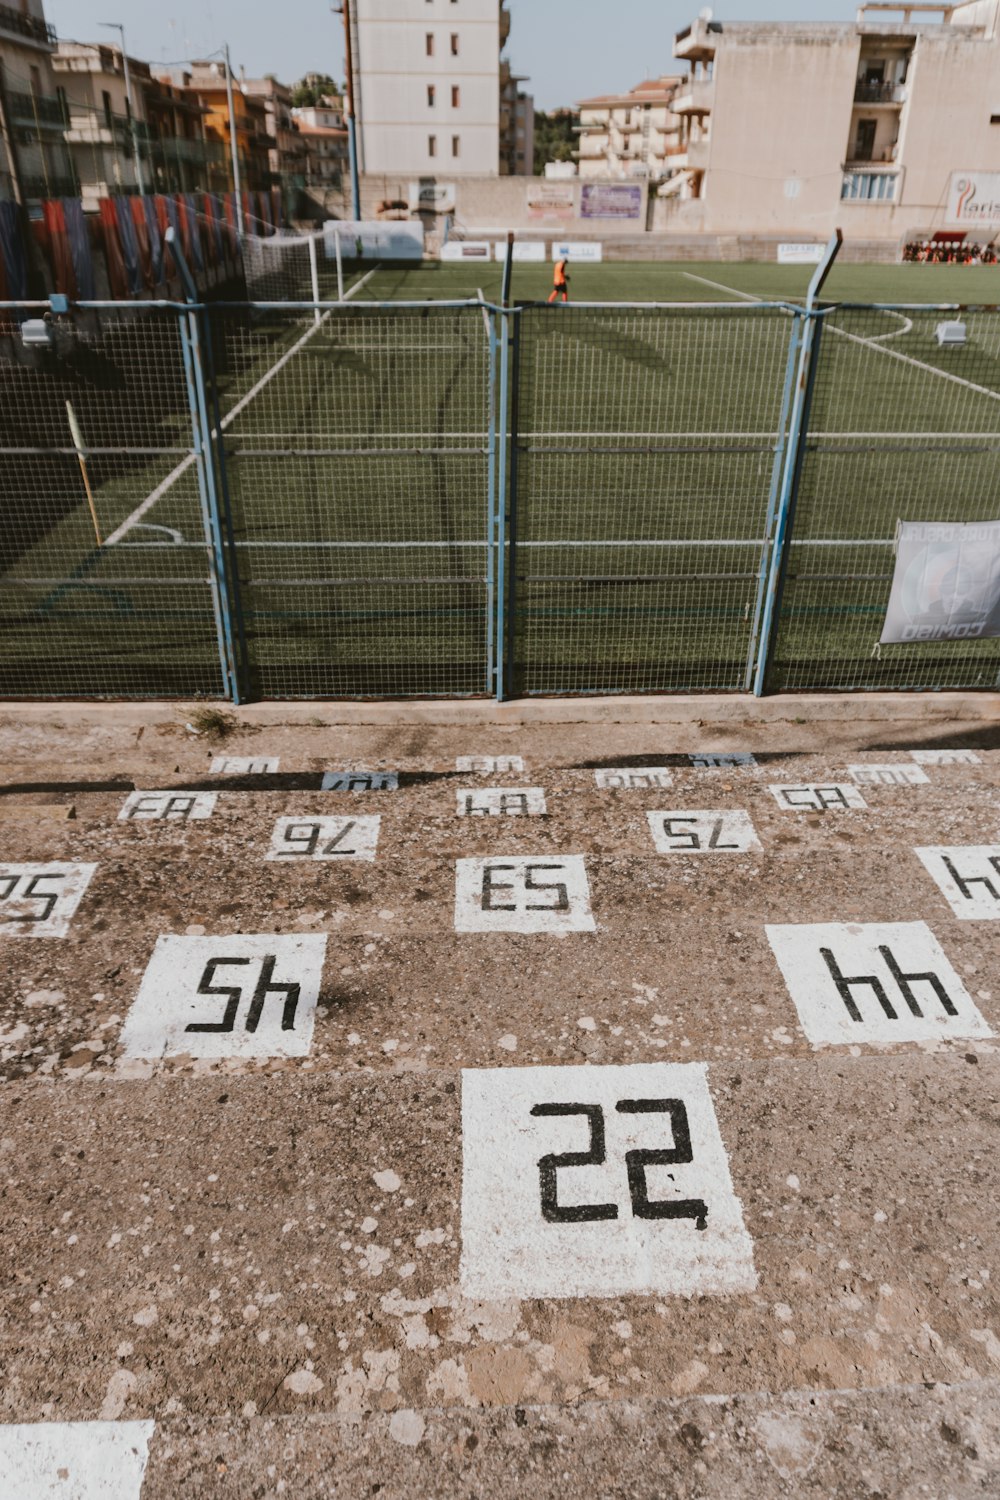 a field with numbers on it and a fence in the background